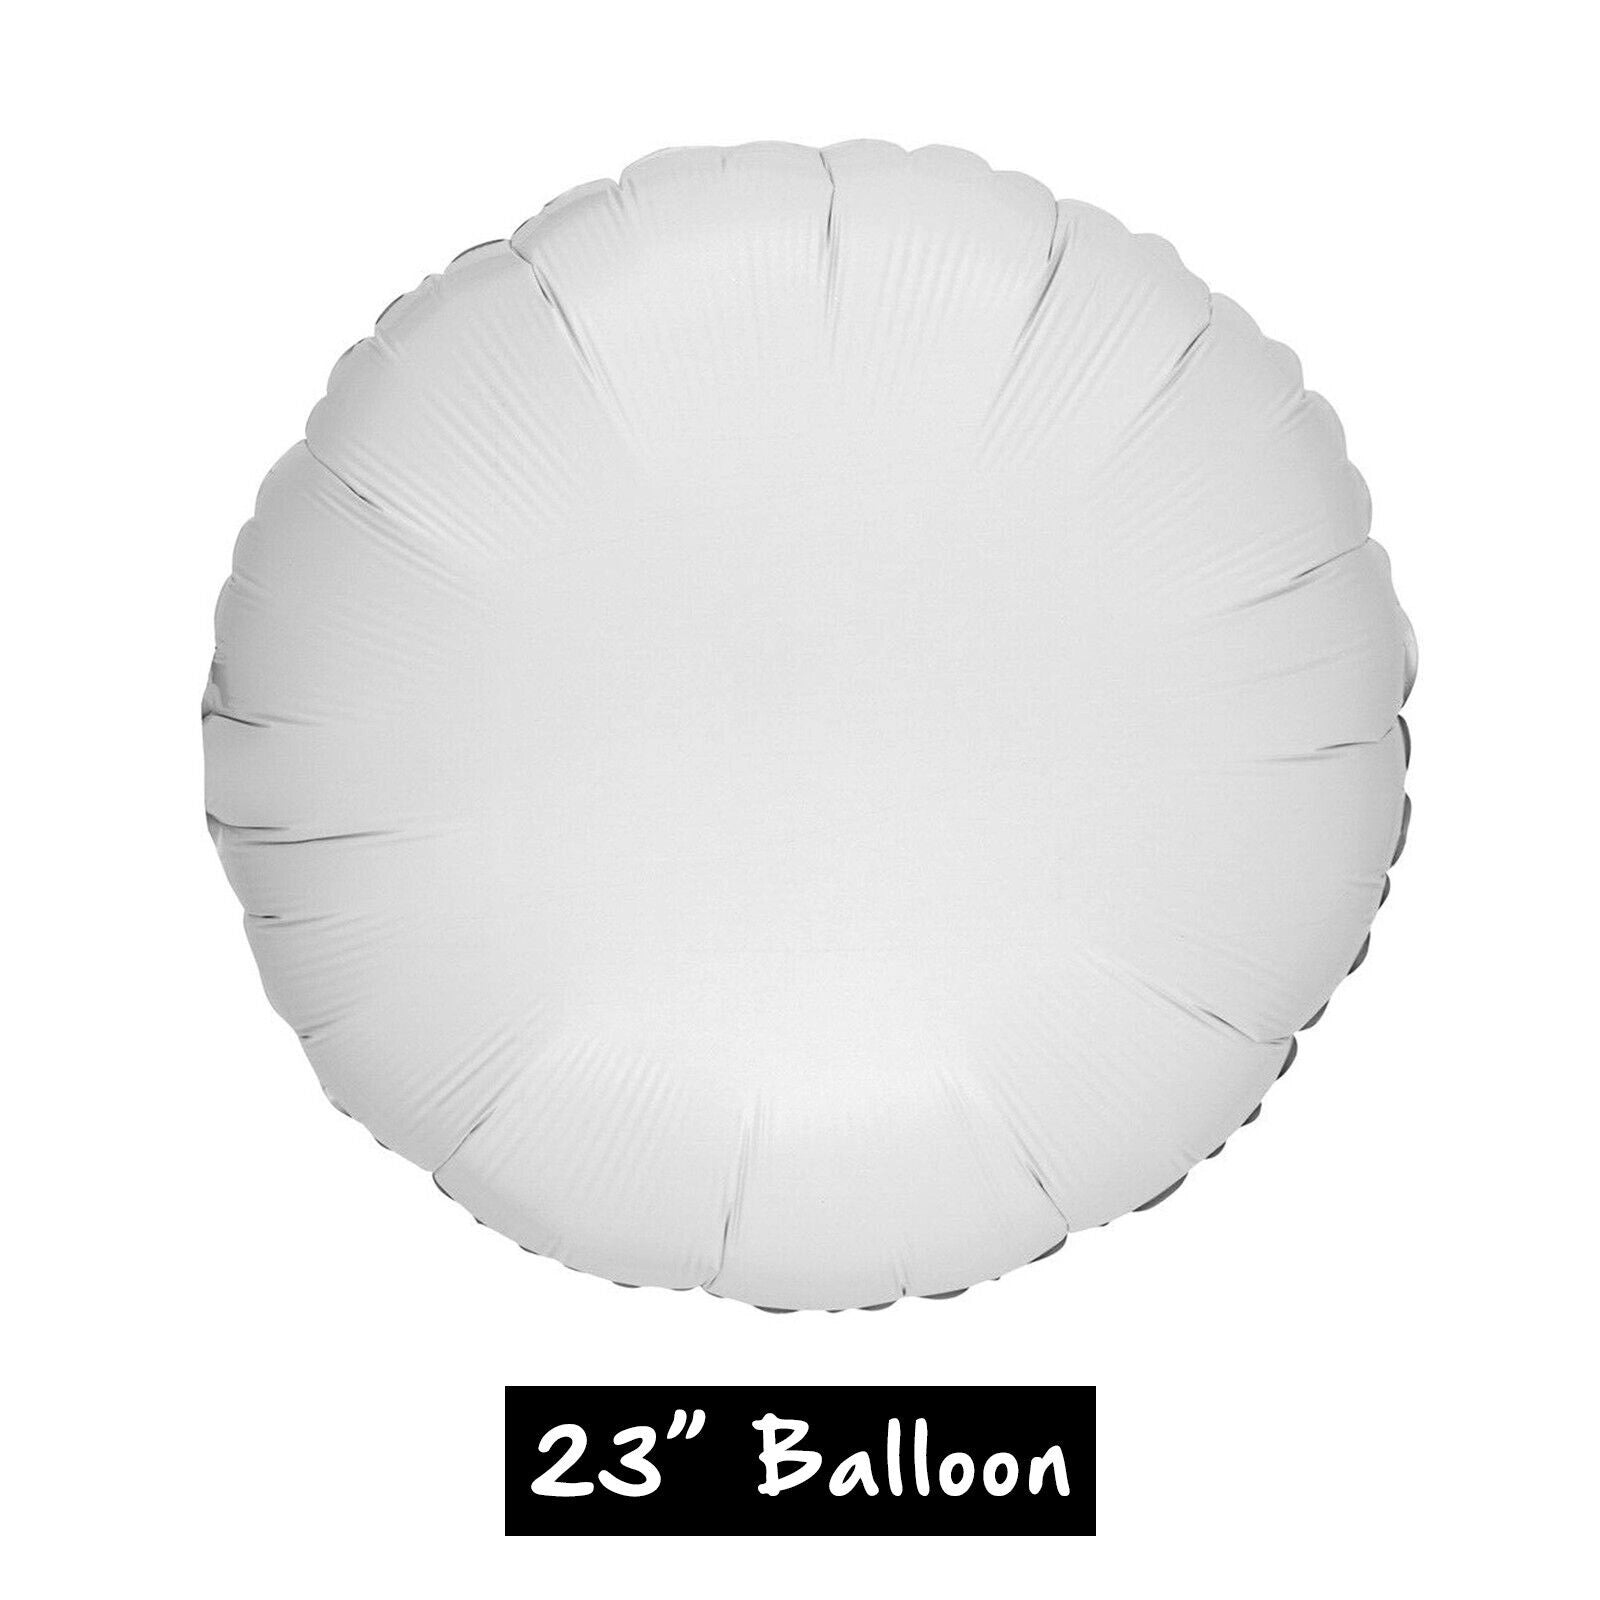 Personalised Photo Balloon Front of Balloon 23 Inches